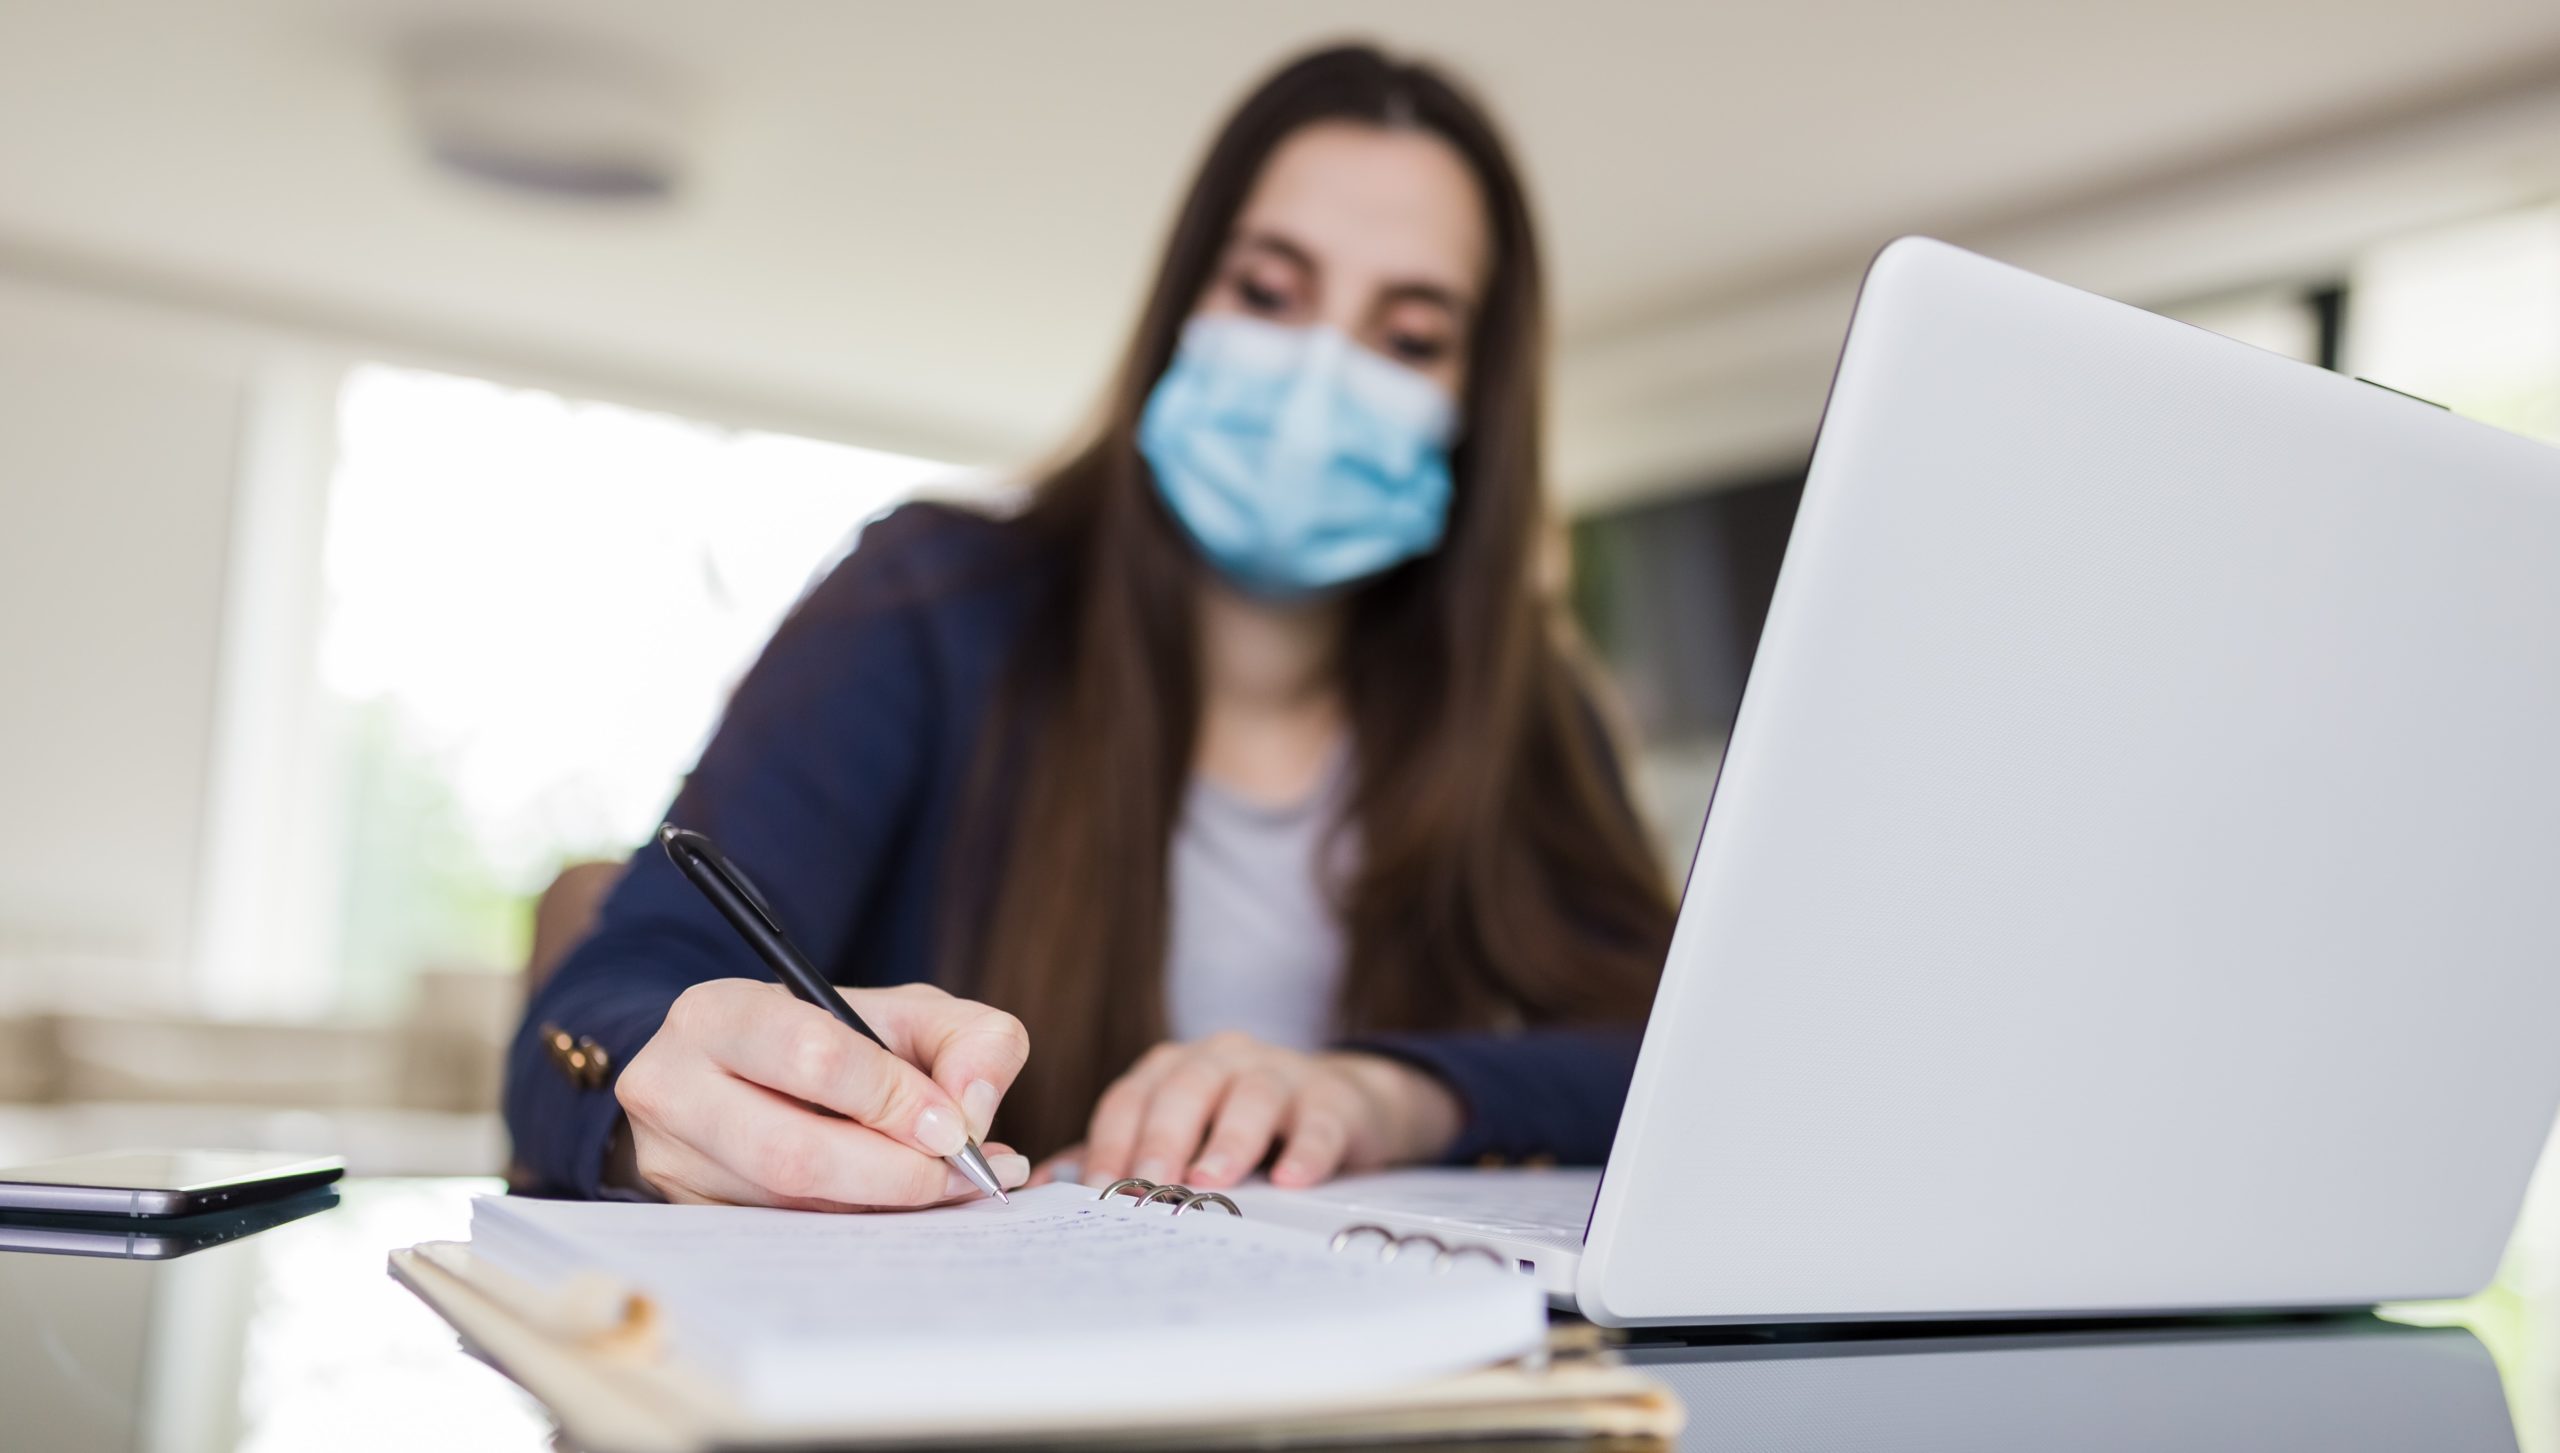 Young woman wearing medical face mask working from home. Freelancer or online learning concept during coronavirus pandemic.